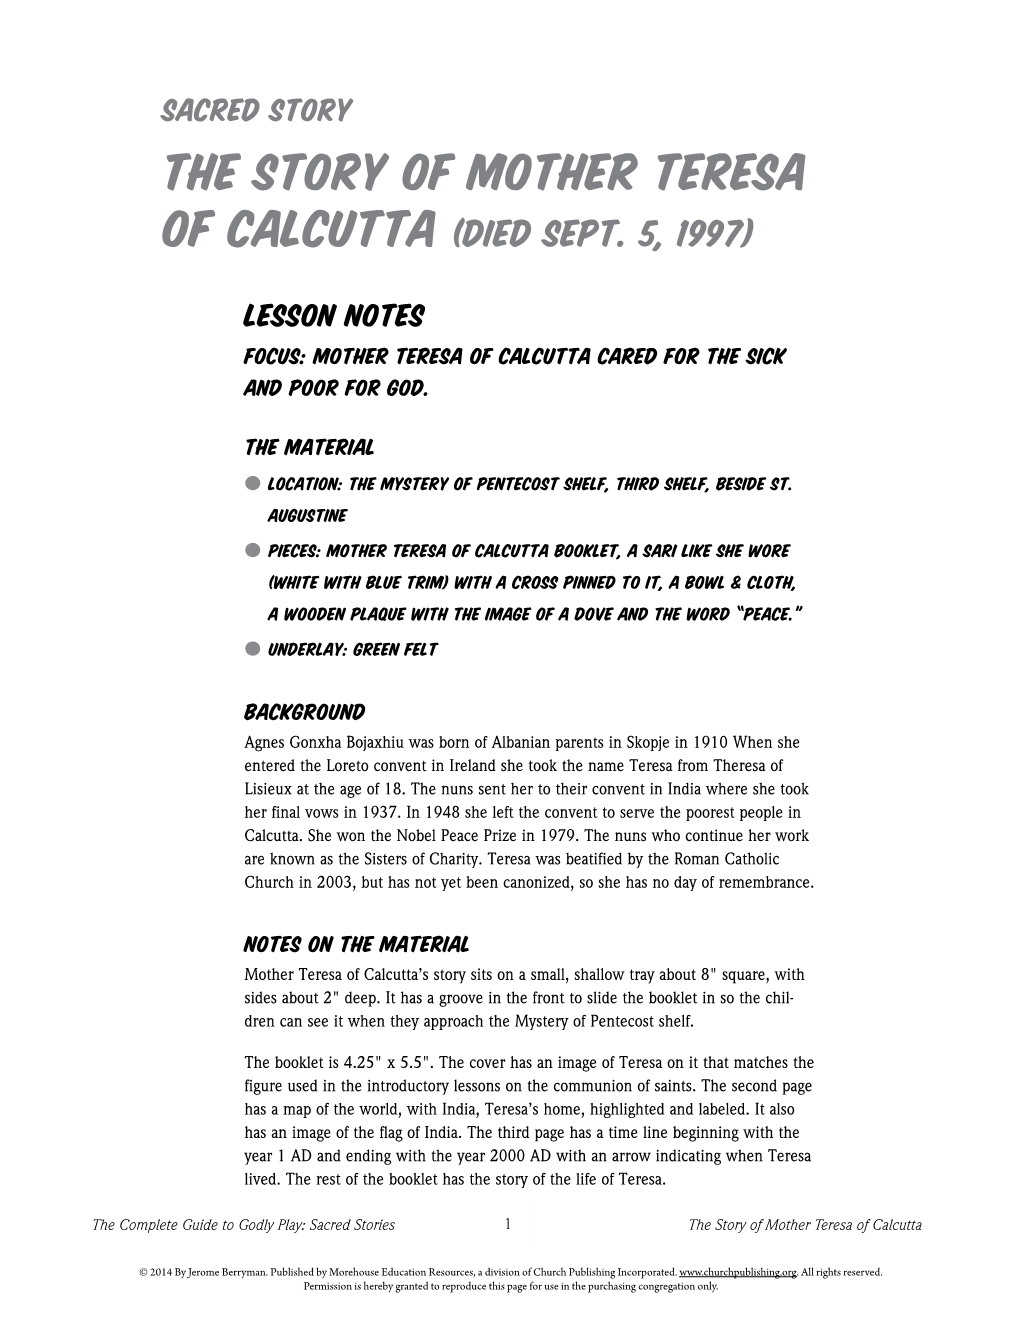 The Story of MOTHER Teresa of Calcutta (Died Sept